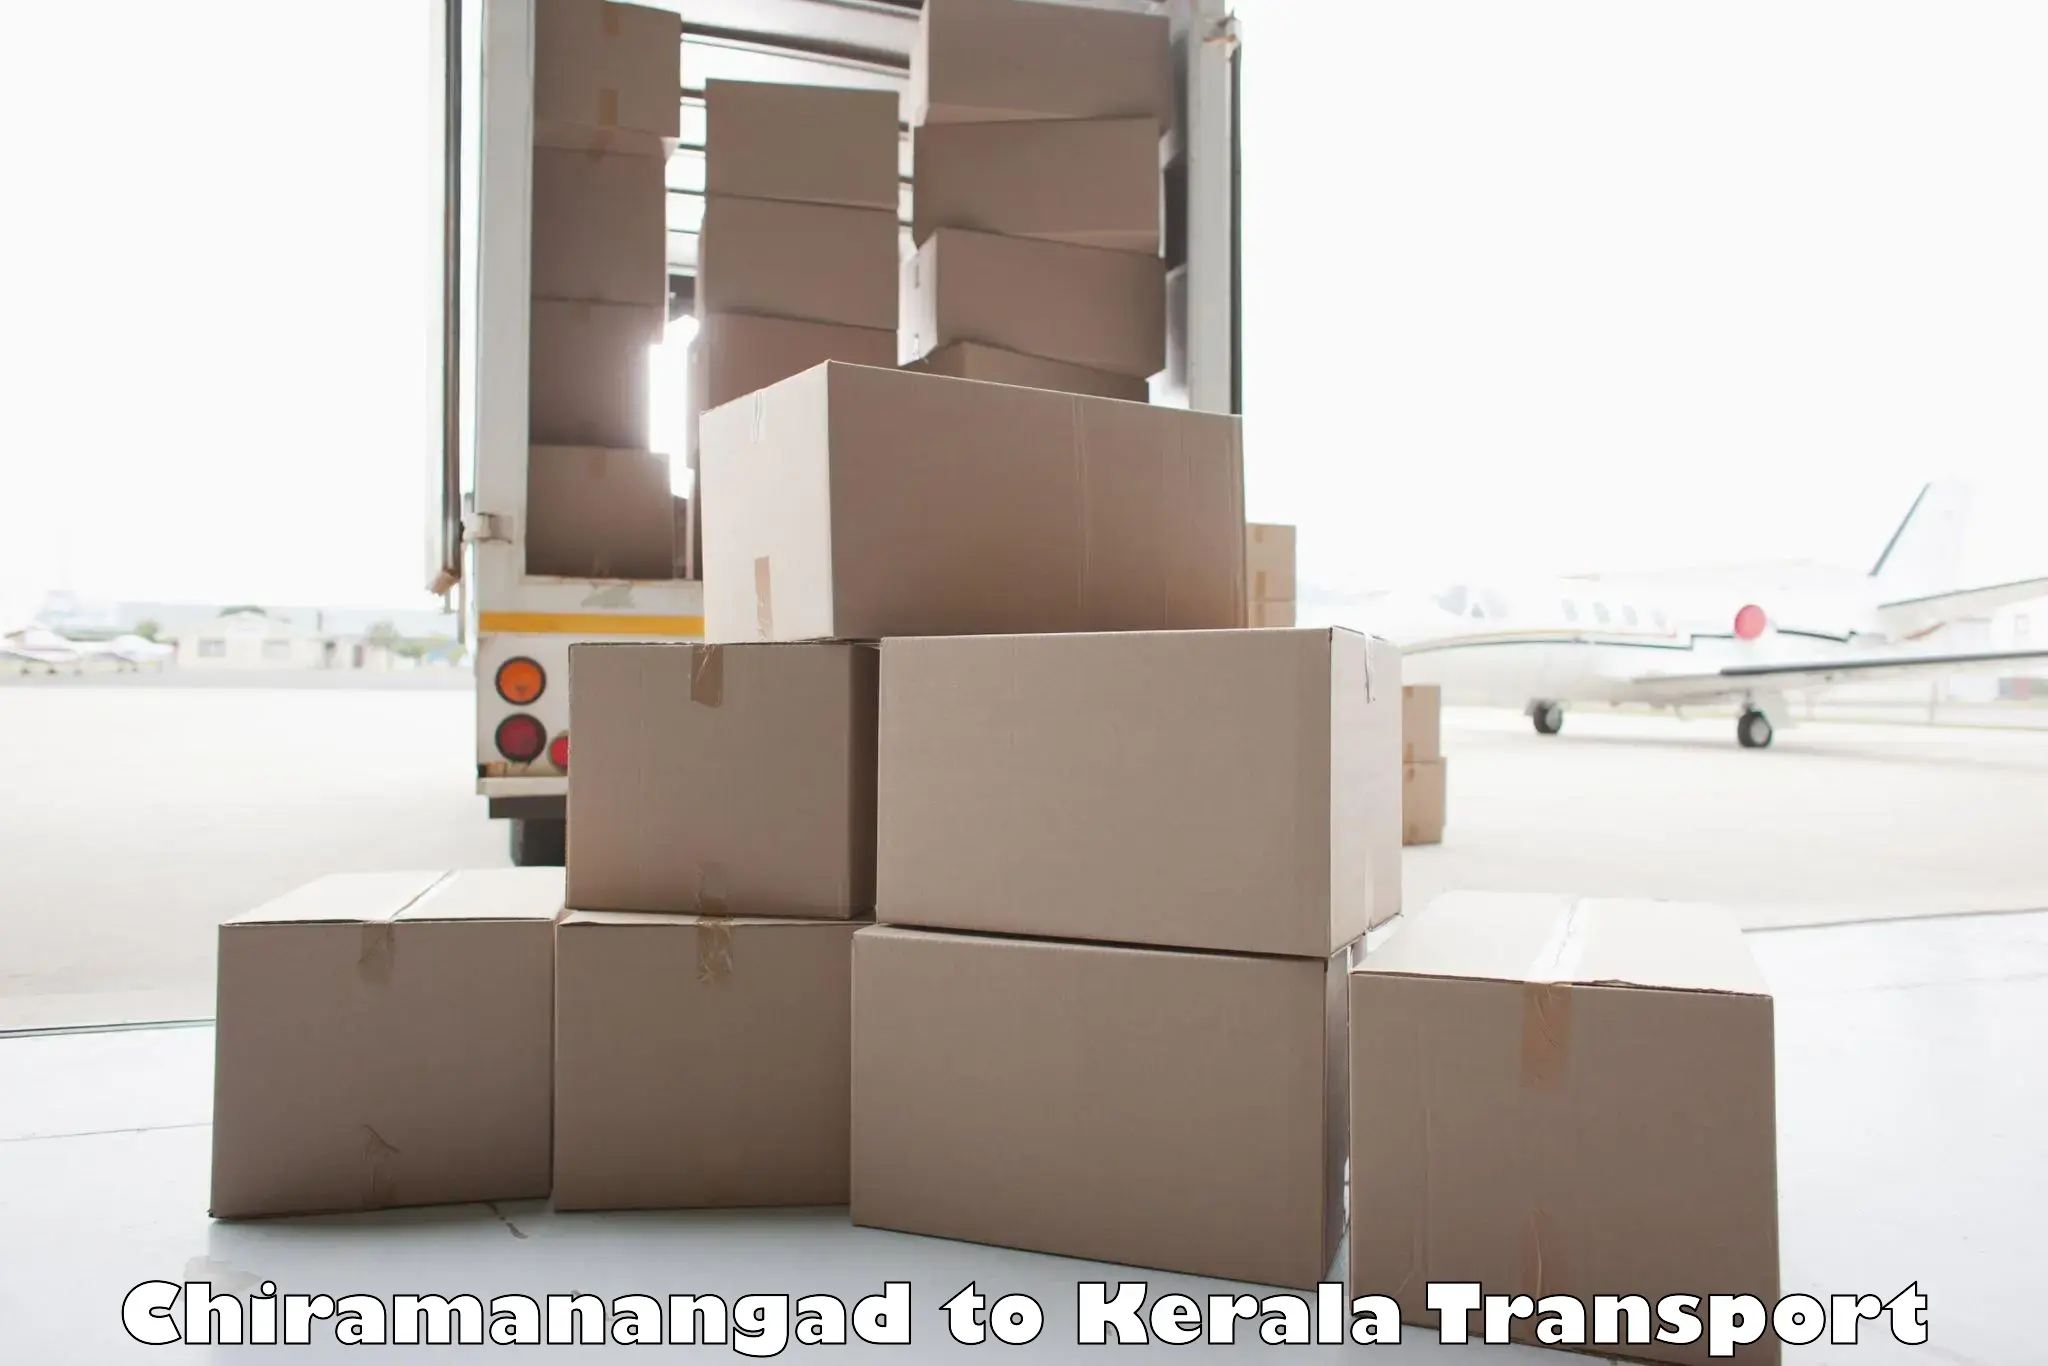 Parcel transport services in Chiramanangad to Kozhikode